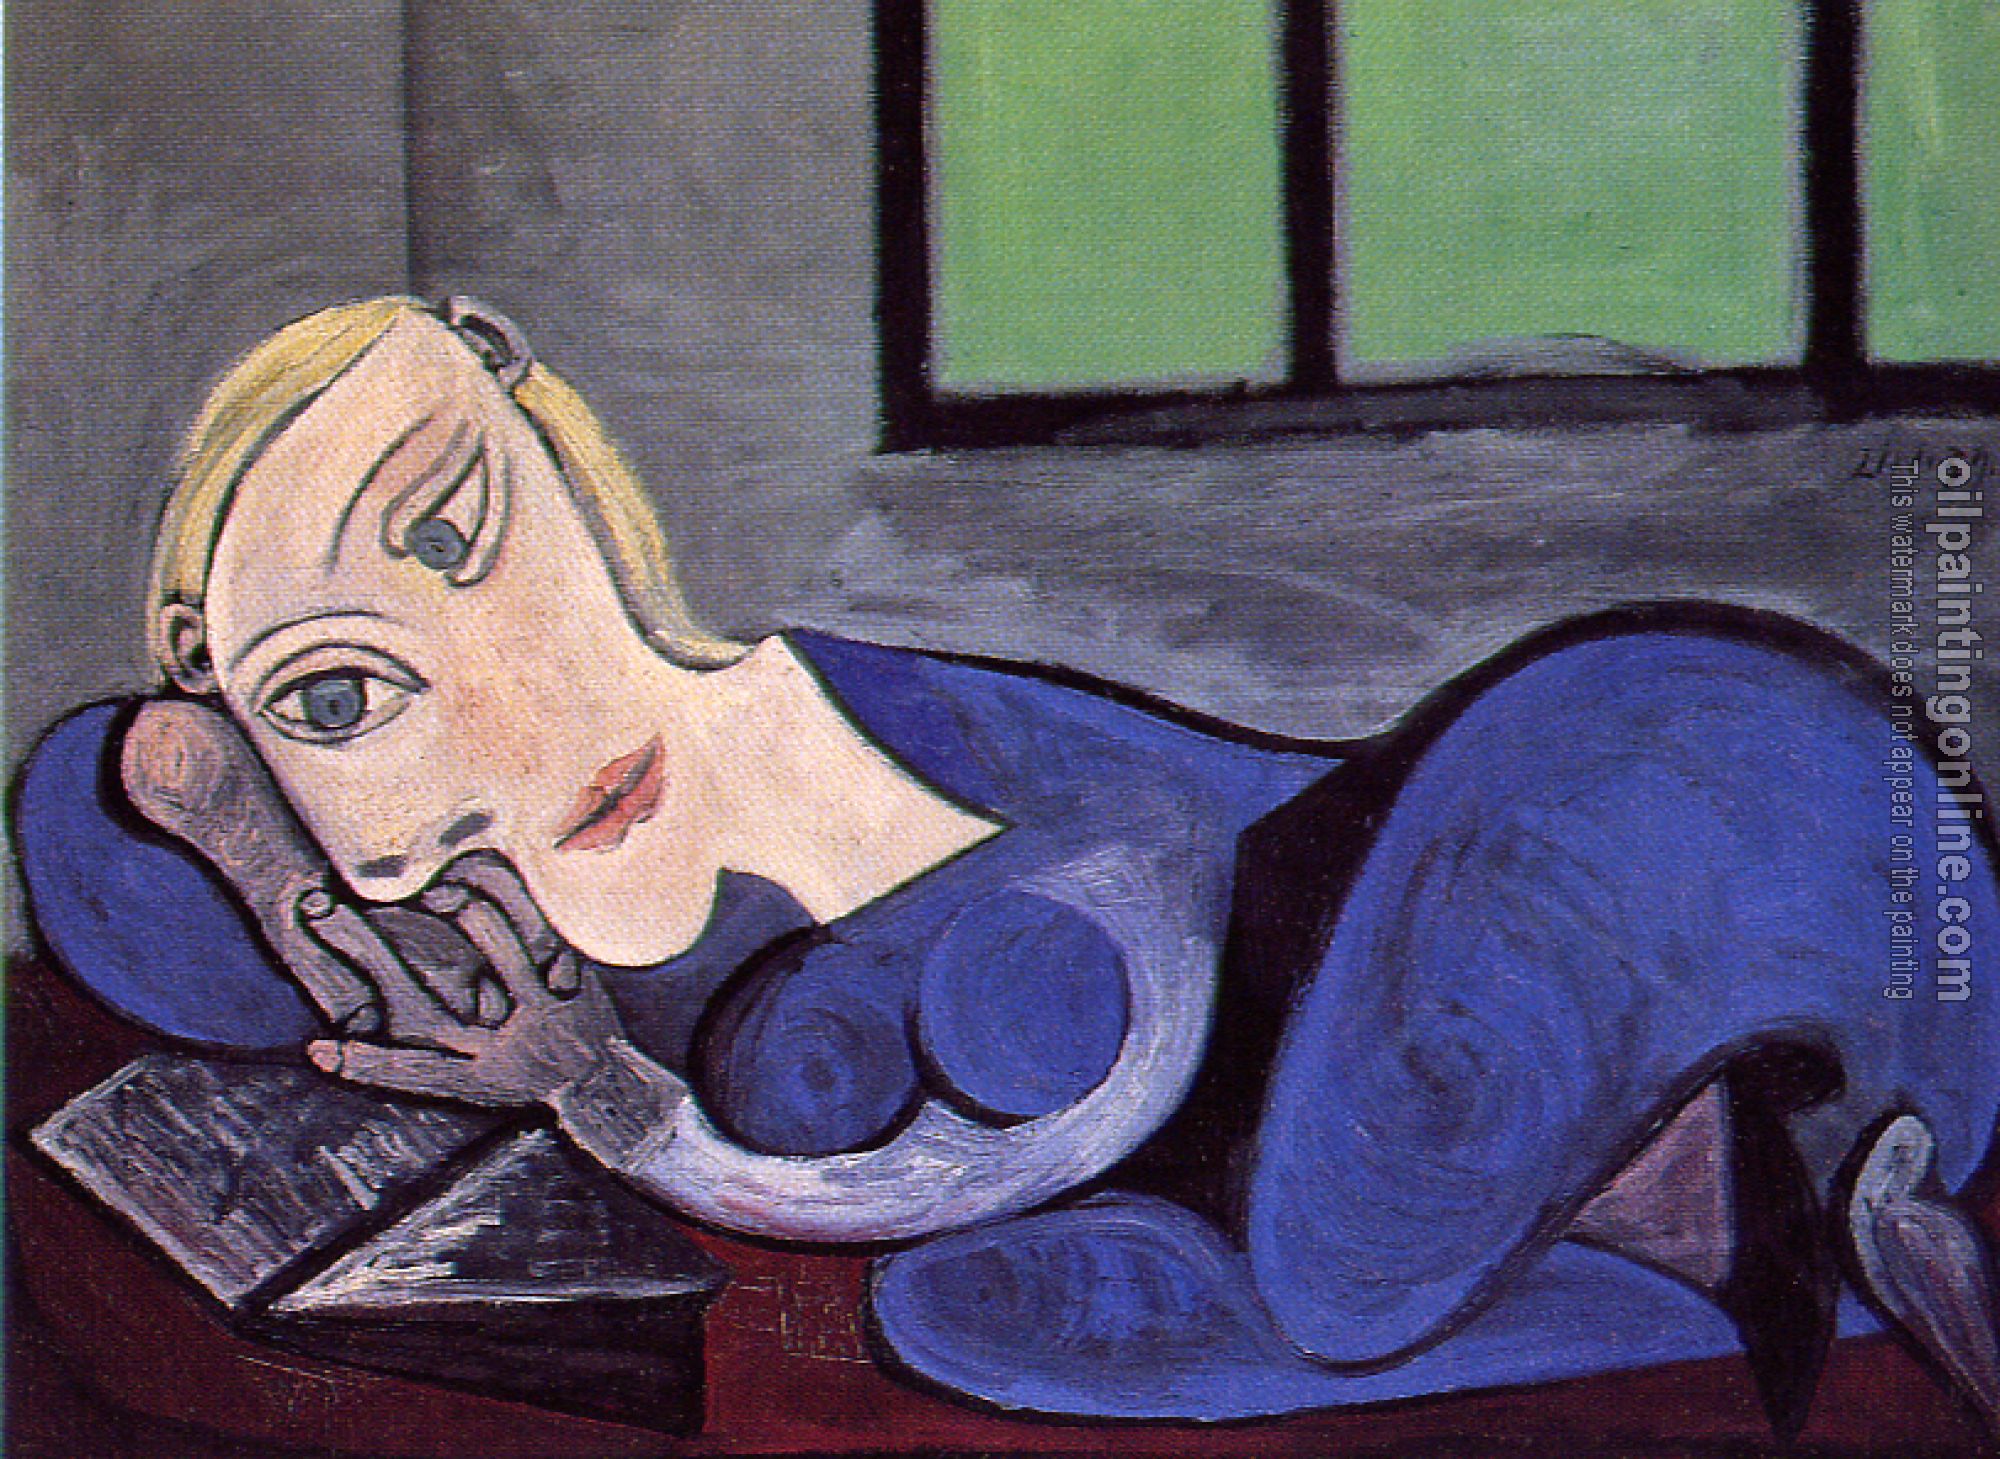 Picasso, Pablo - reclining woman reading